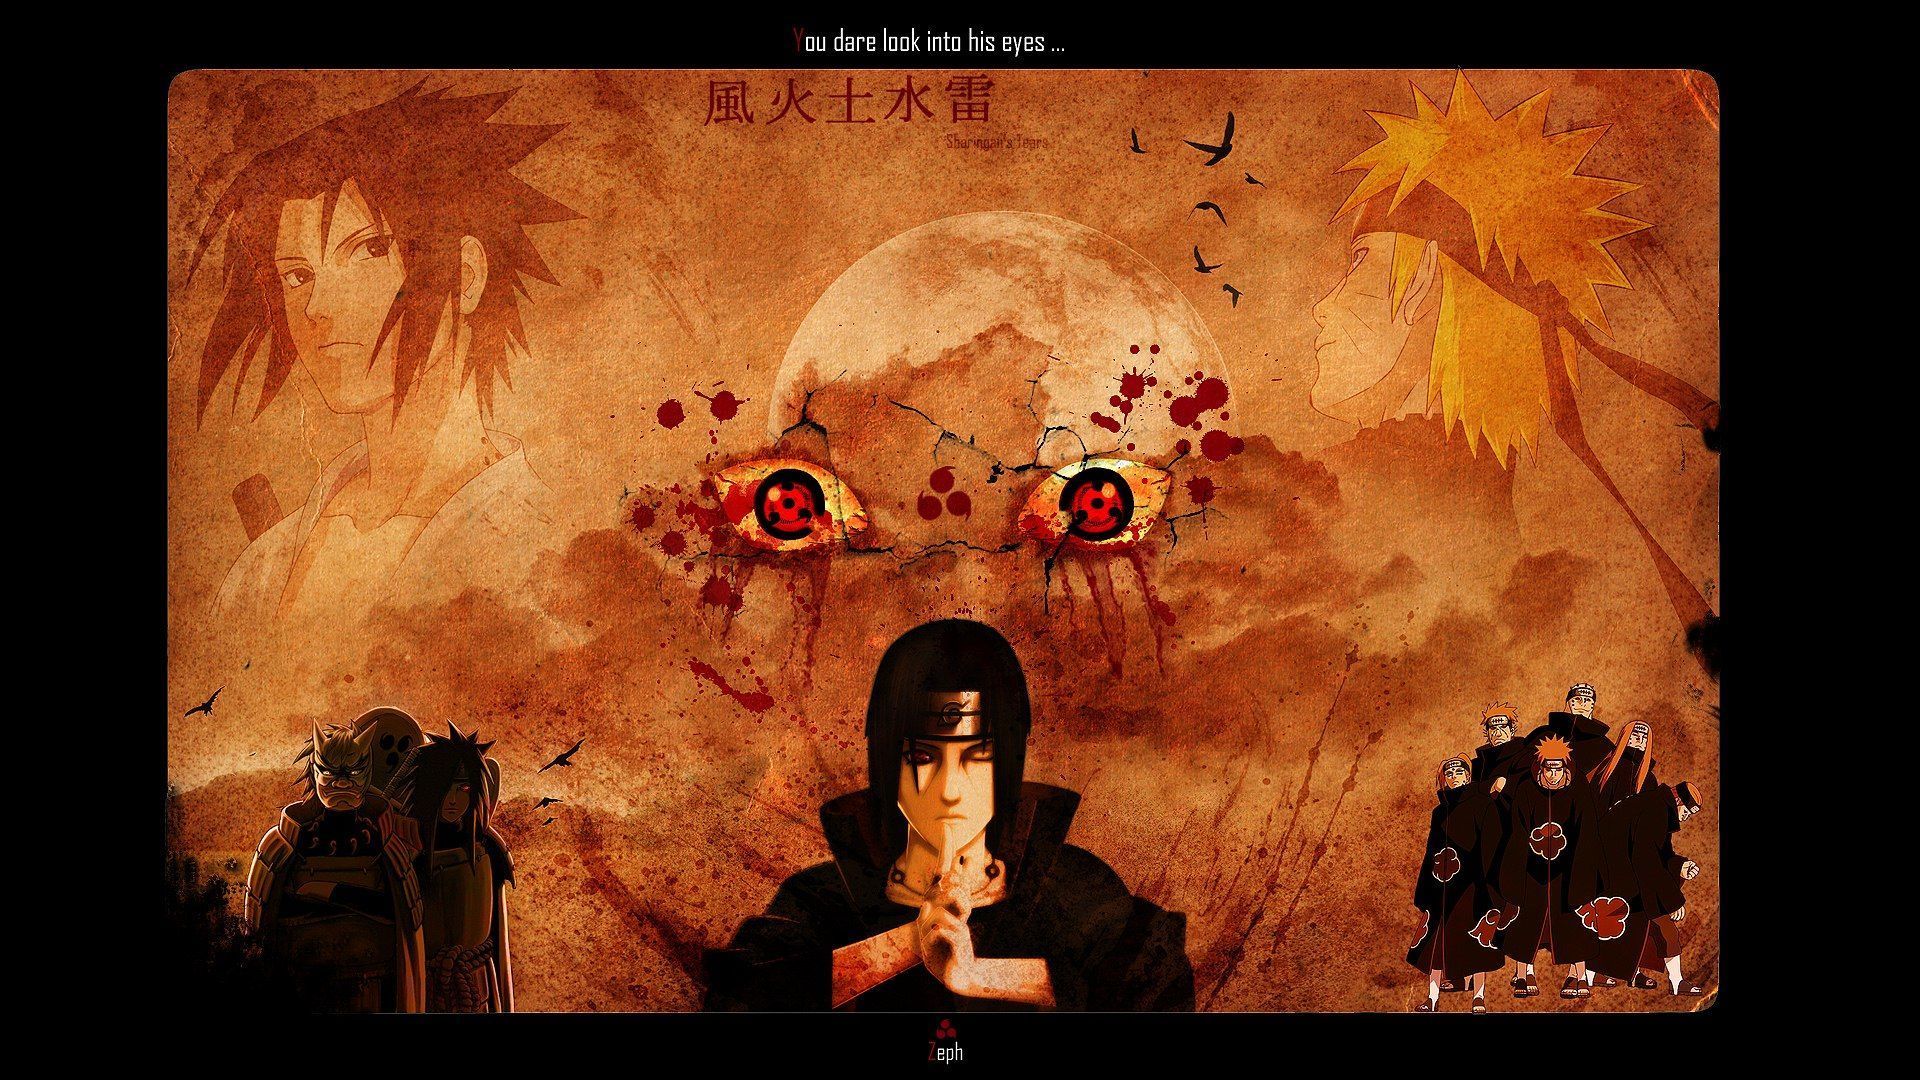 Naruto wallpaper 1920x1080 - (#34208) - High Quality and ...